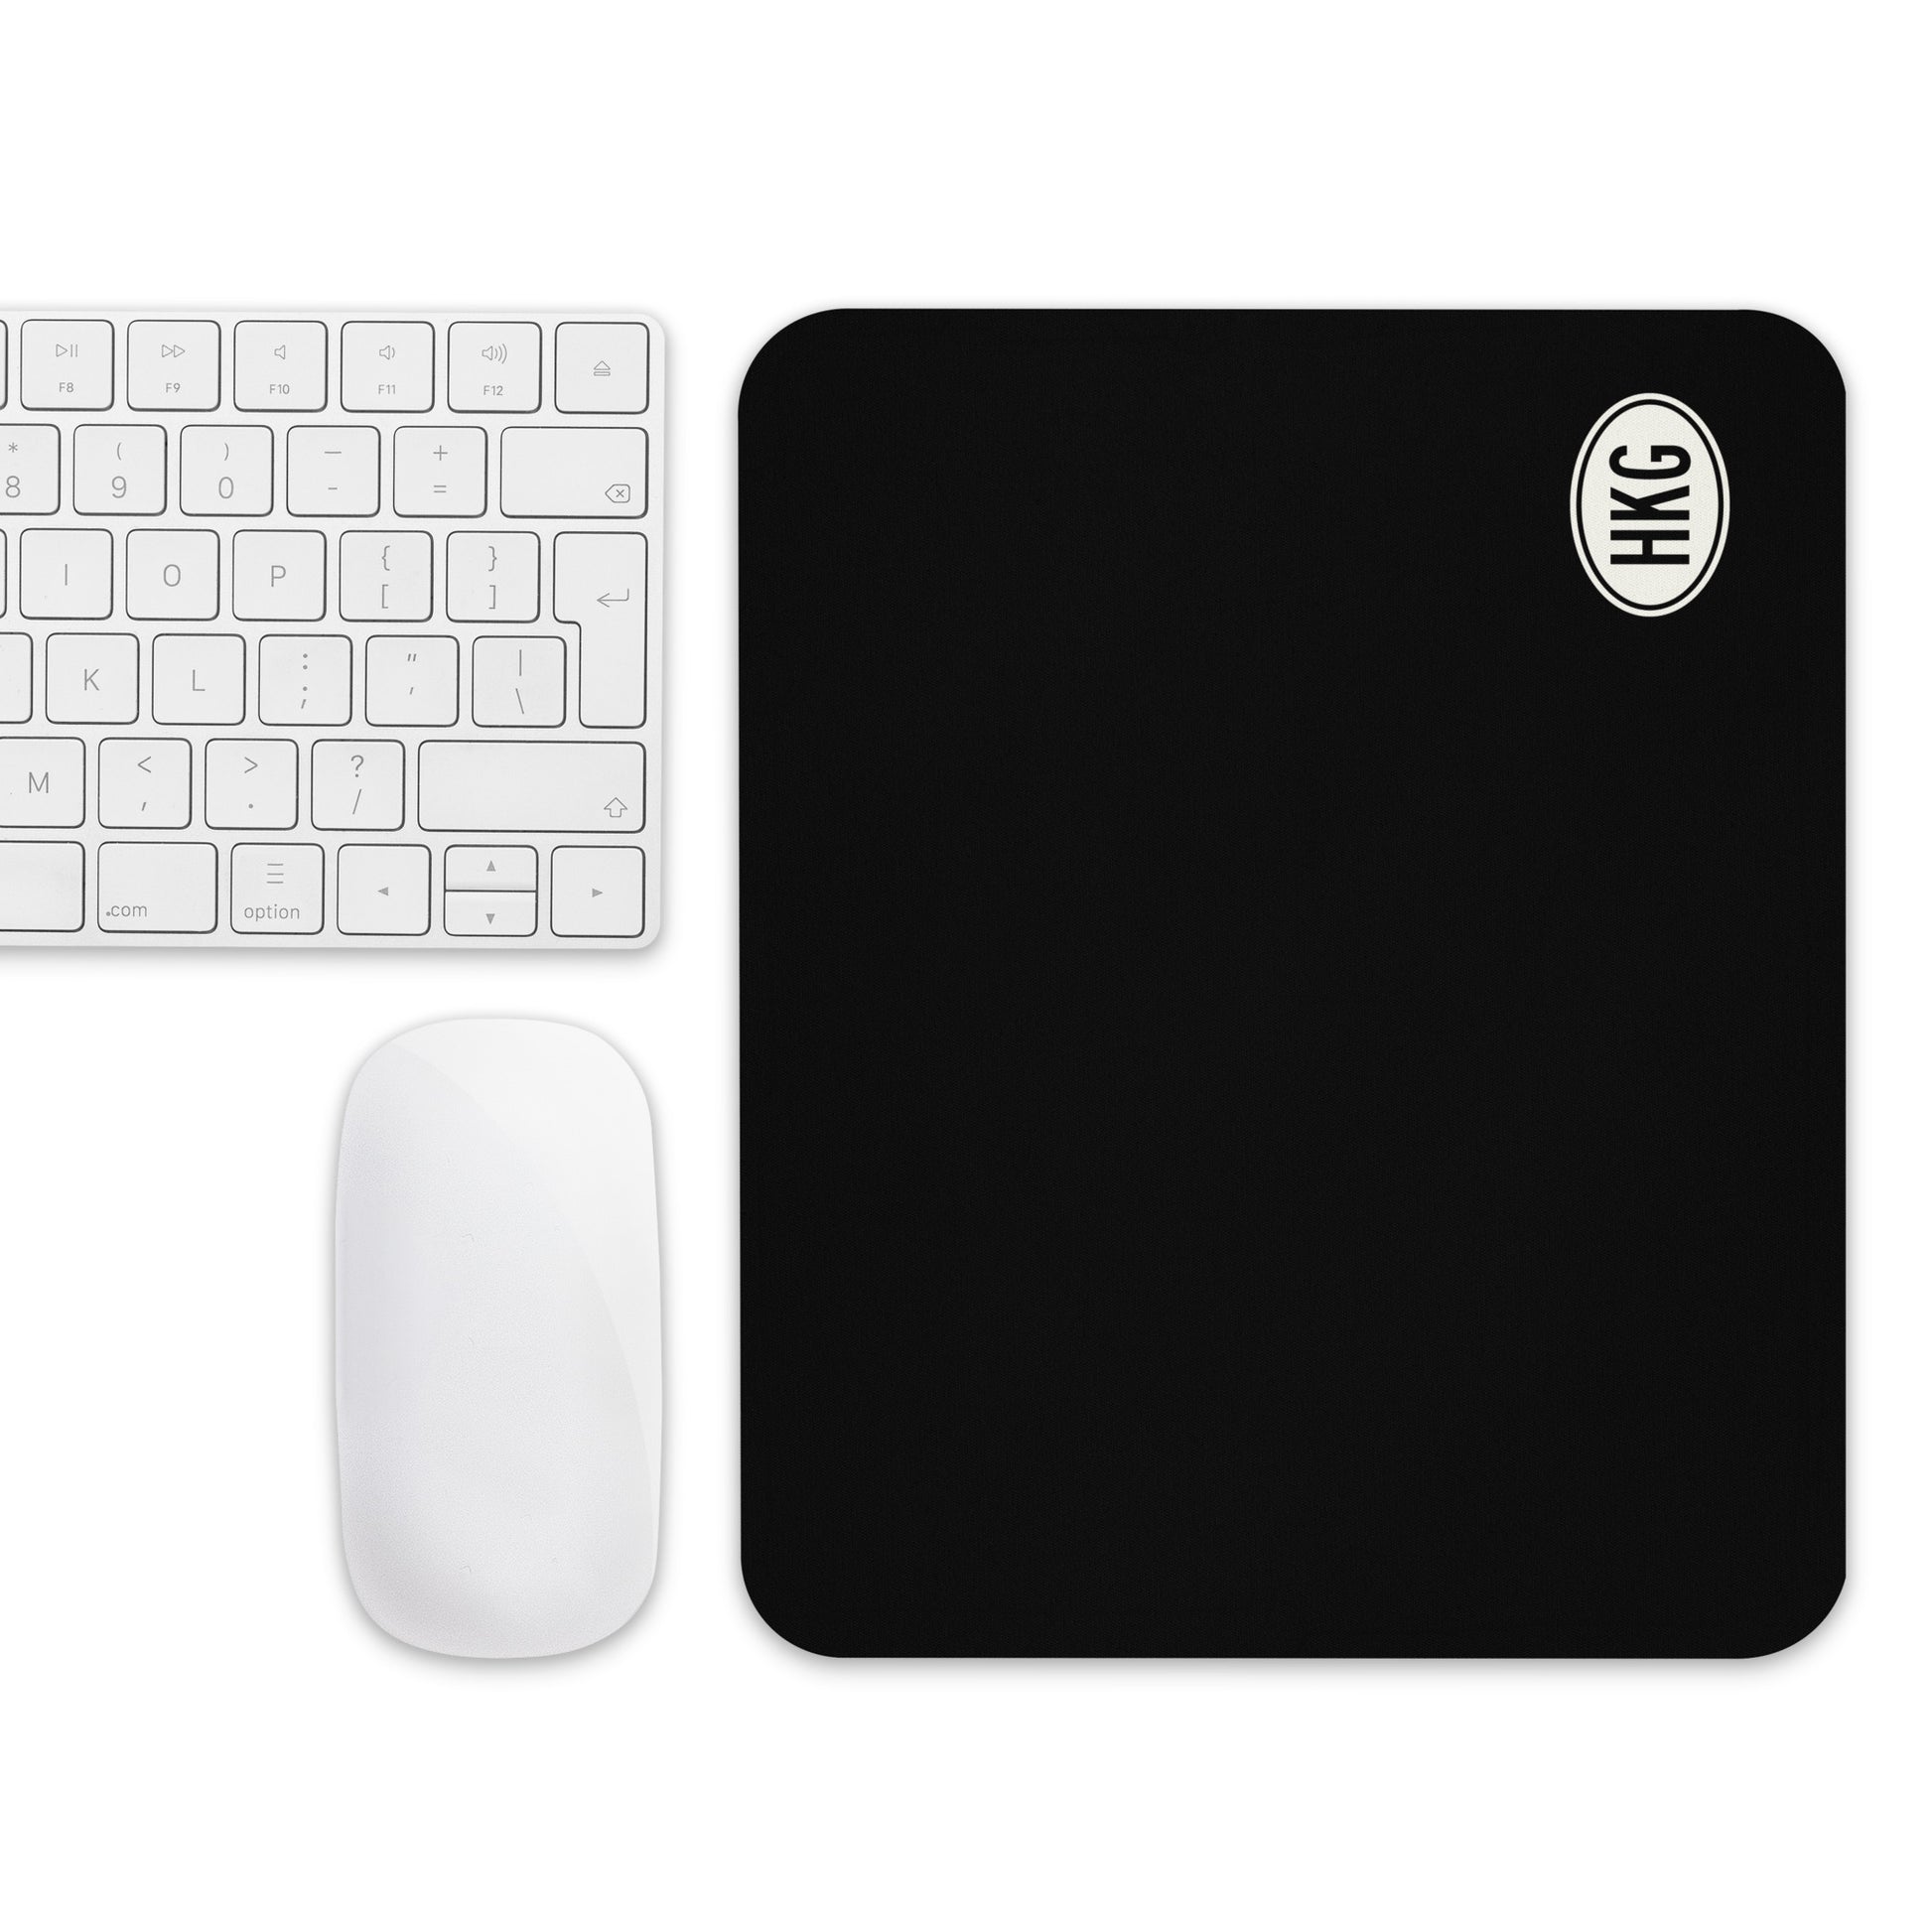 Unique Travel Gift Mouse Pad - White Oval • HKG Hong Kong • YHM Designs - Image 04